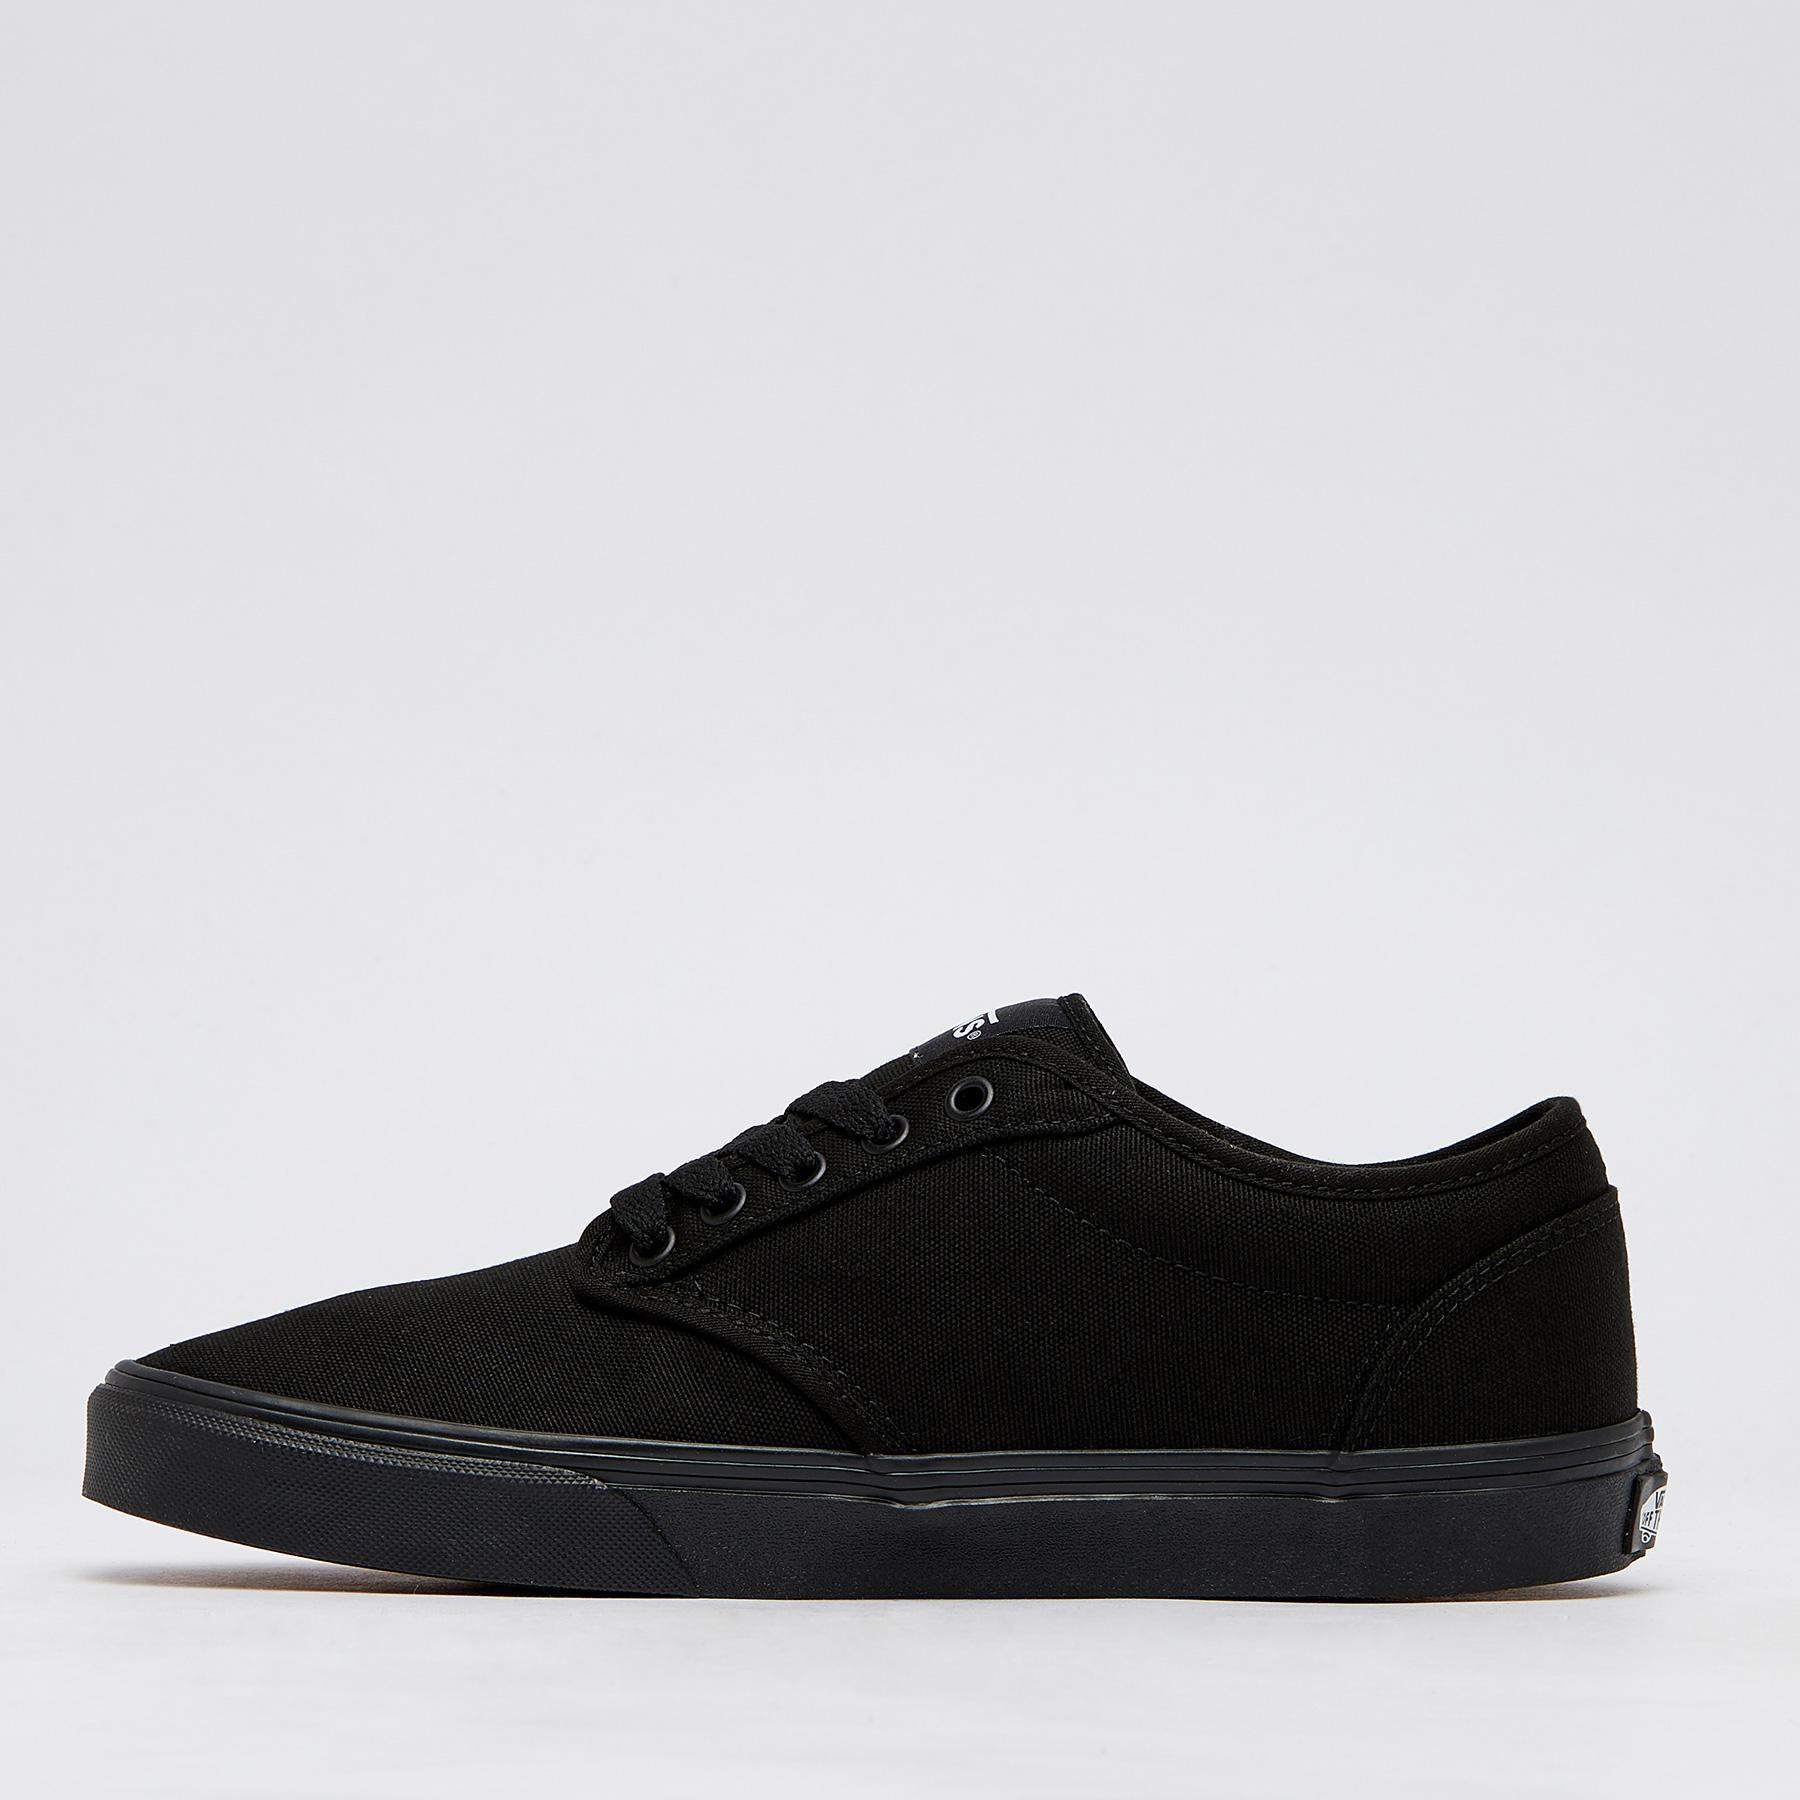 Vans Atwood Shoes In Black/black - Fast Shipping & Easy Returns - City ...